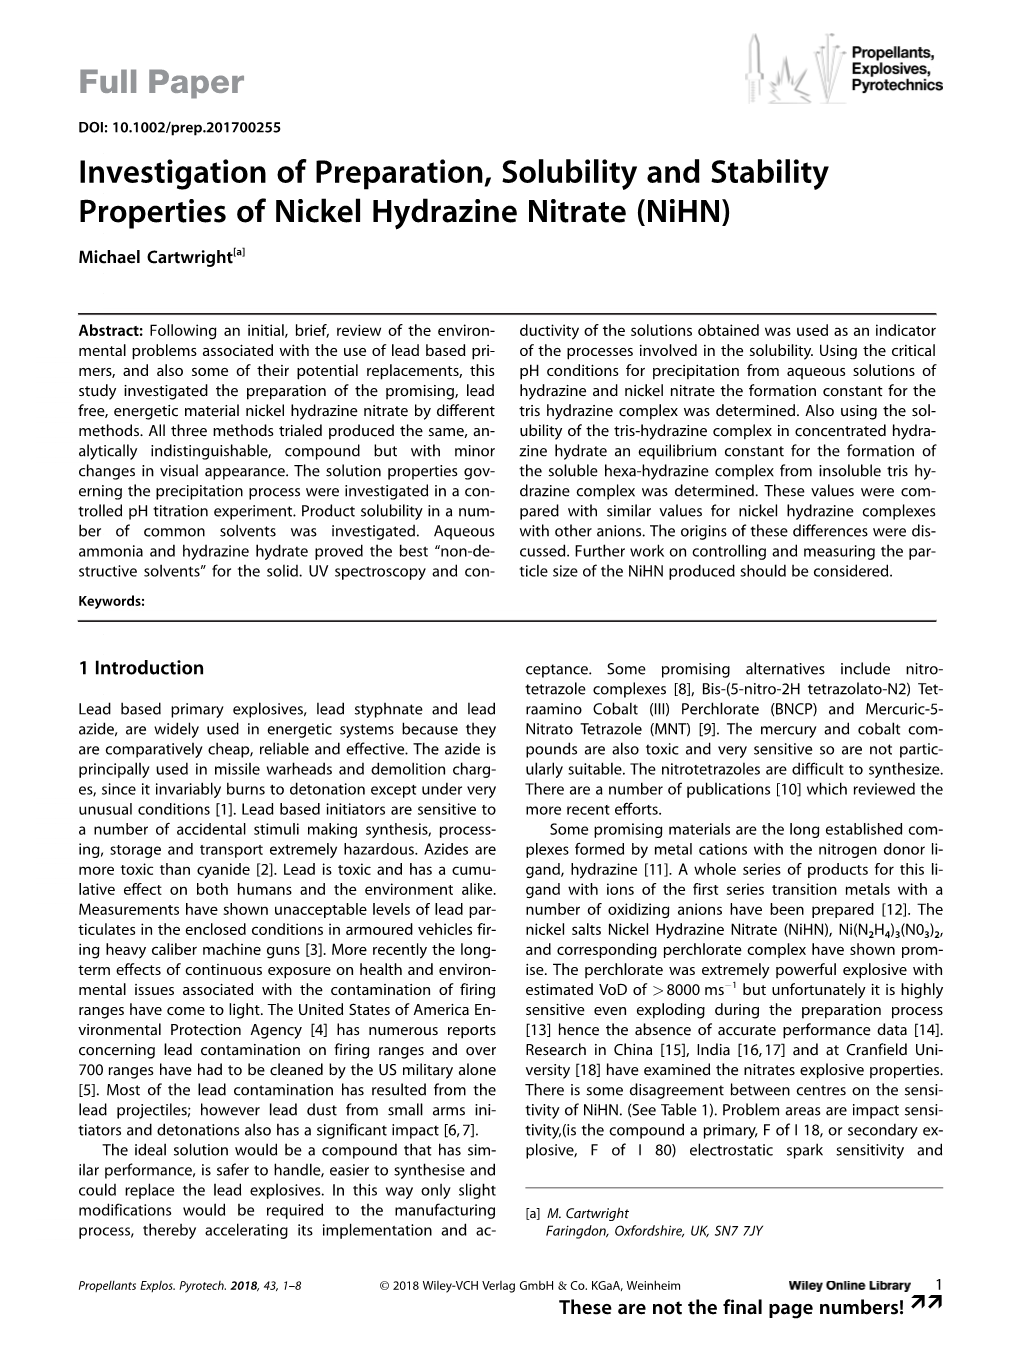 Investigation of Preparation, Solubility and Stability Properties of Nickel Hydrazine Nitrate (Nihn)